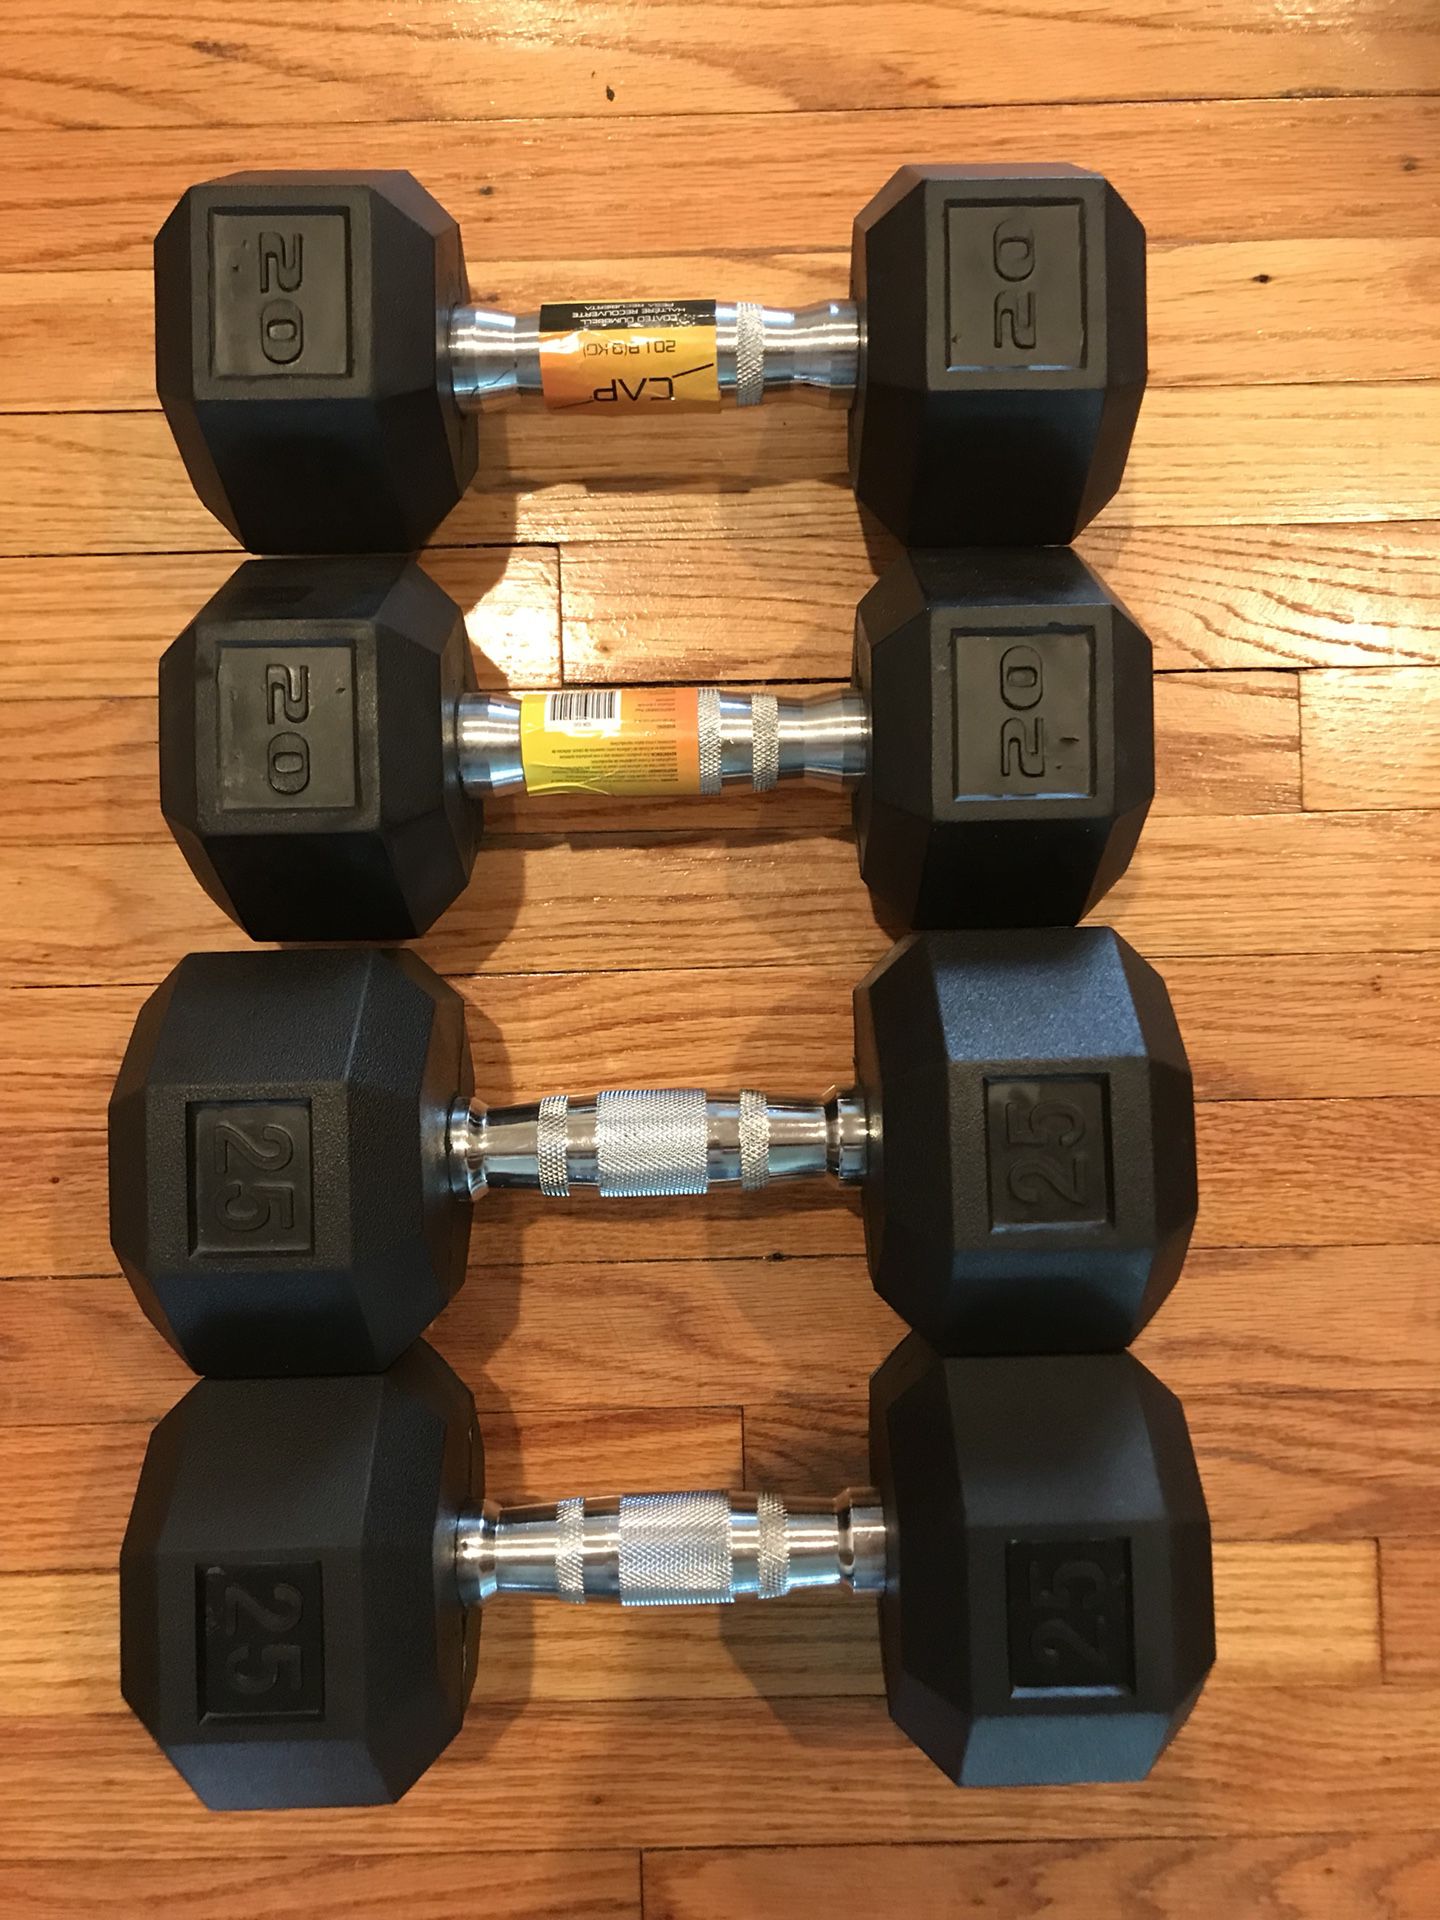 NEW Rubber Dumbbells (2x20s 2x25s) for $80 Firm!!!